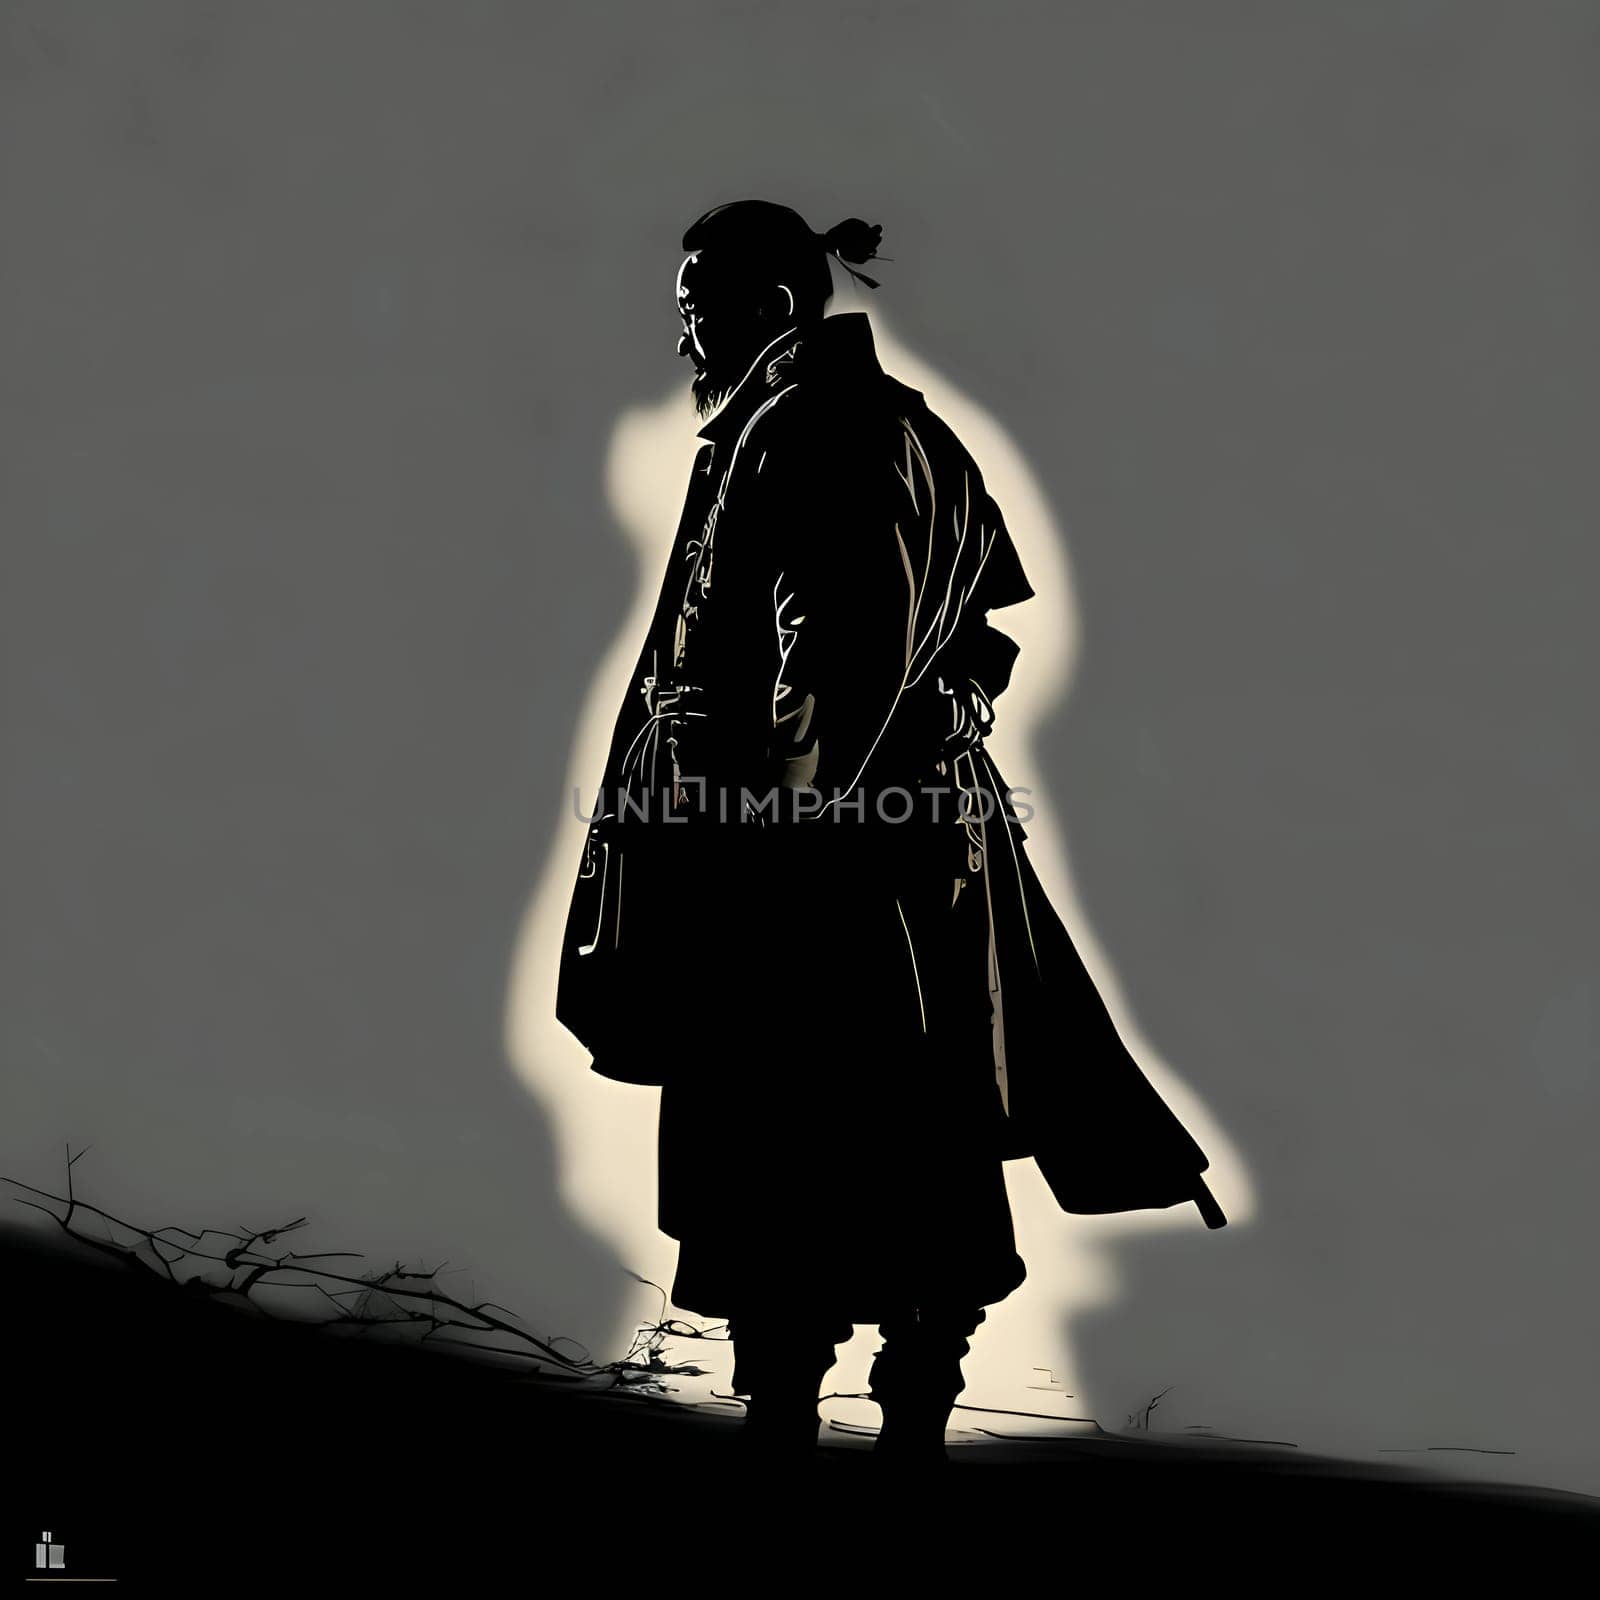 Vector illustration of a chinese man in black silhouette against a clean grey background, capturing graceful forms.